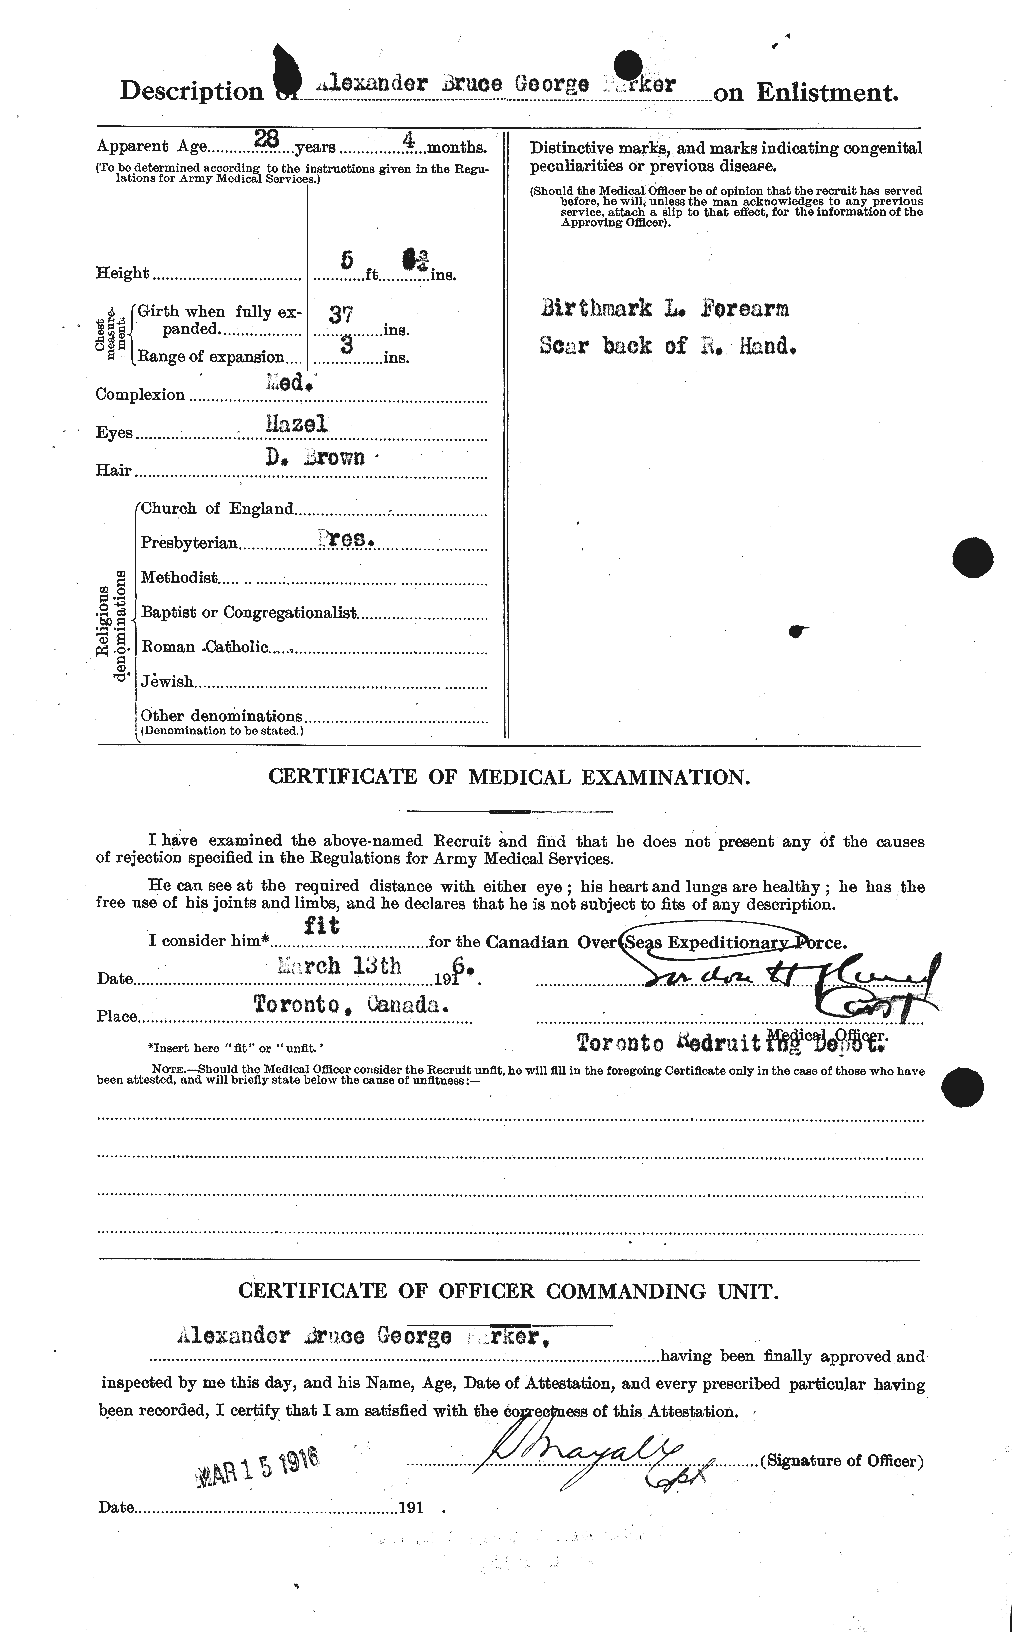 Personnel Records of the First World War - CEF 564972b